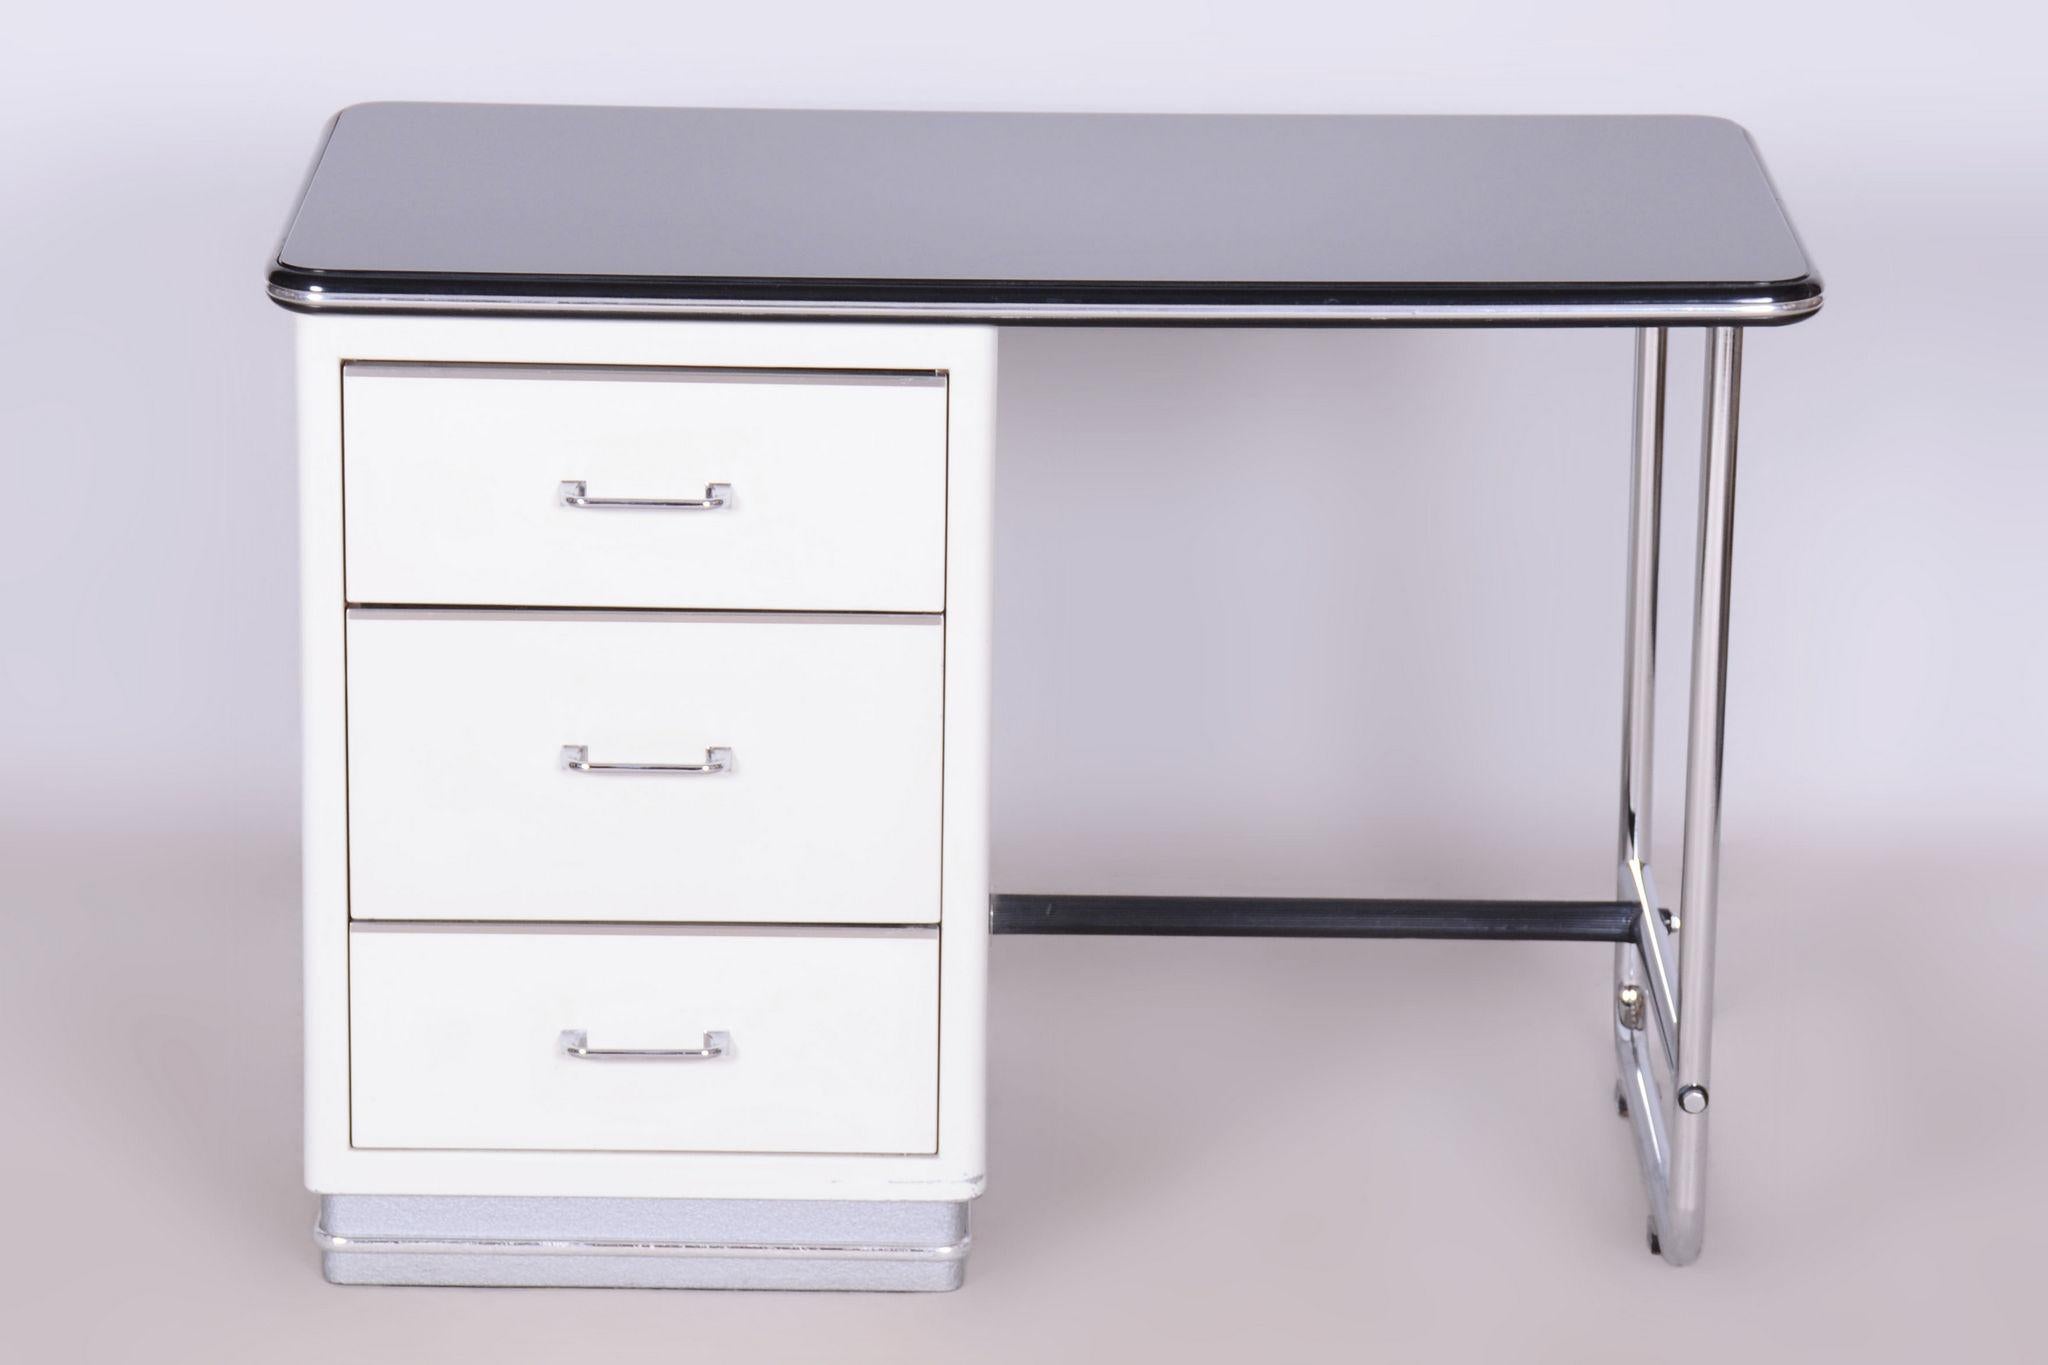 Dimensions of the desk:
Height: 70 cm (27.6 in)
Width: 100 cm (39.4 in)
Depth: 55 cm (21.7 in)

Leg space:
Height: 67.5 cm (26.6 in)
Width: 45 cm (17.7 in)

Our professional refurbishing team in Czechia has fully restored it according to the